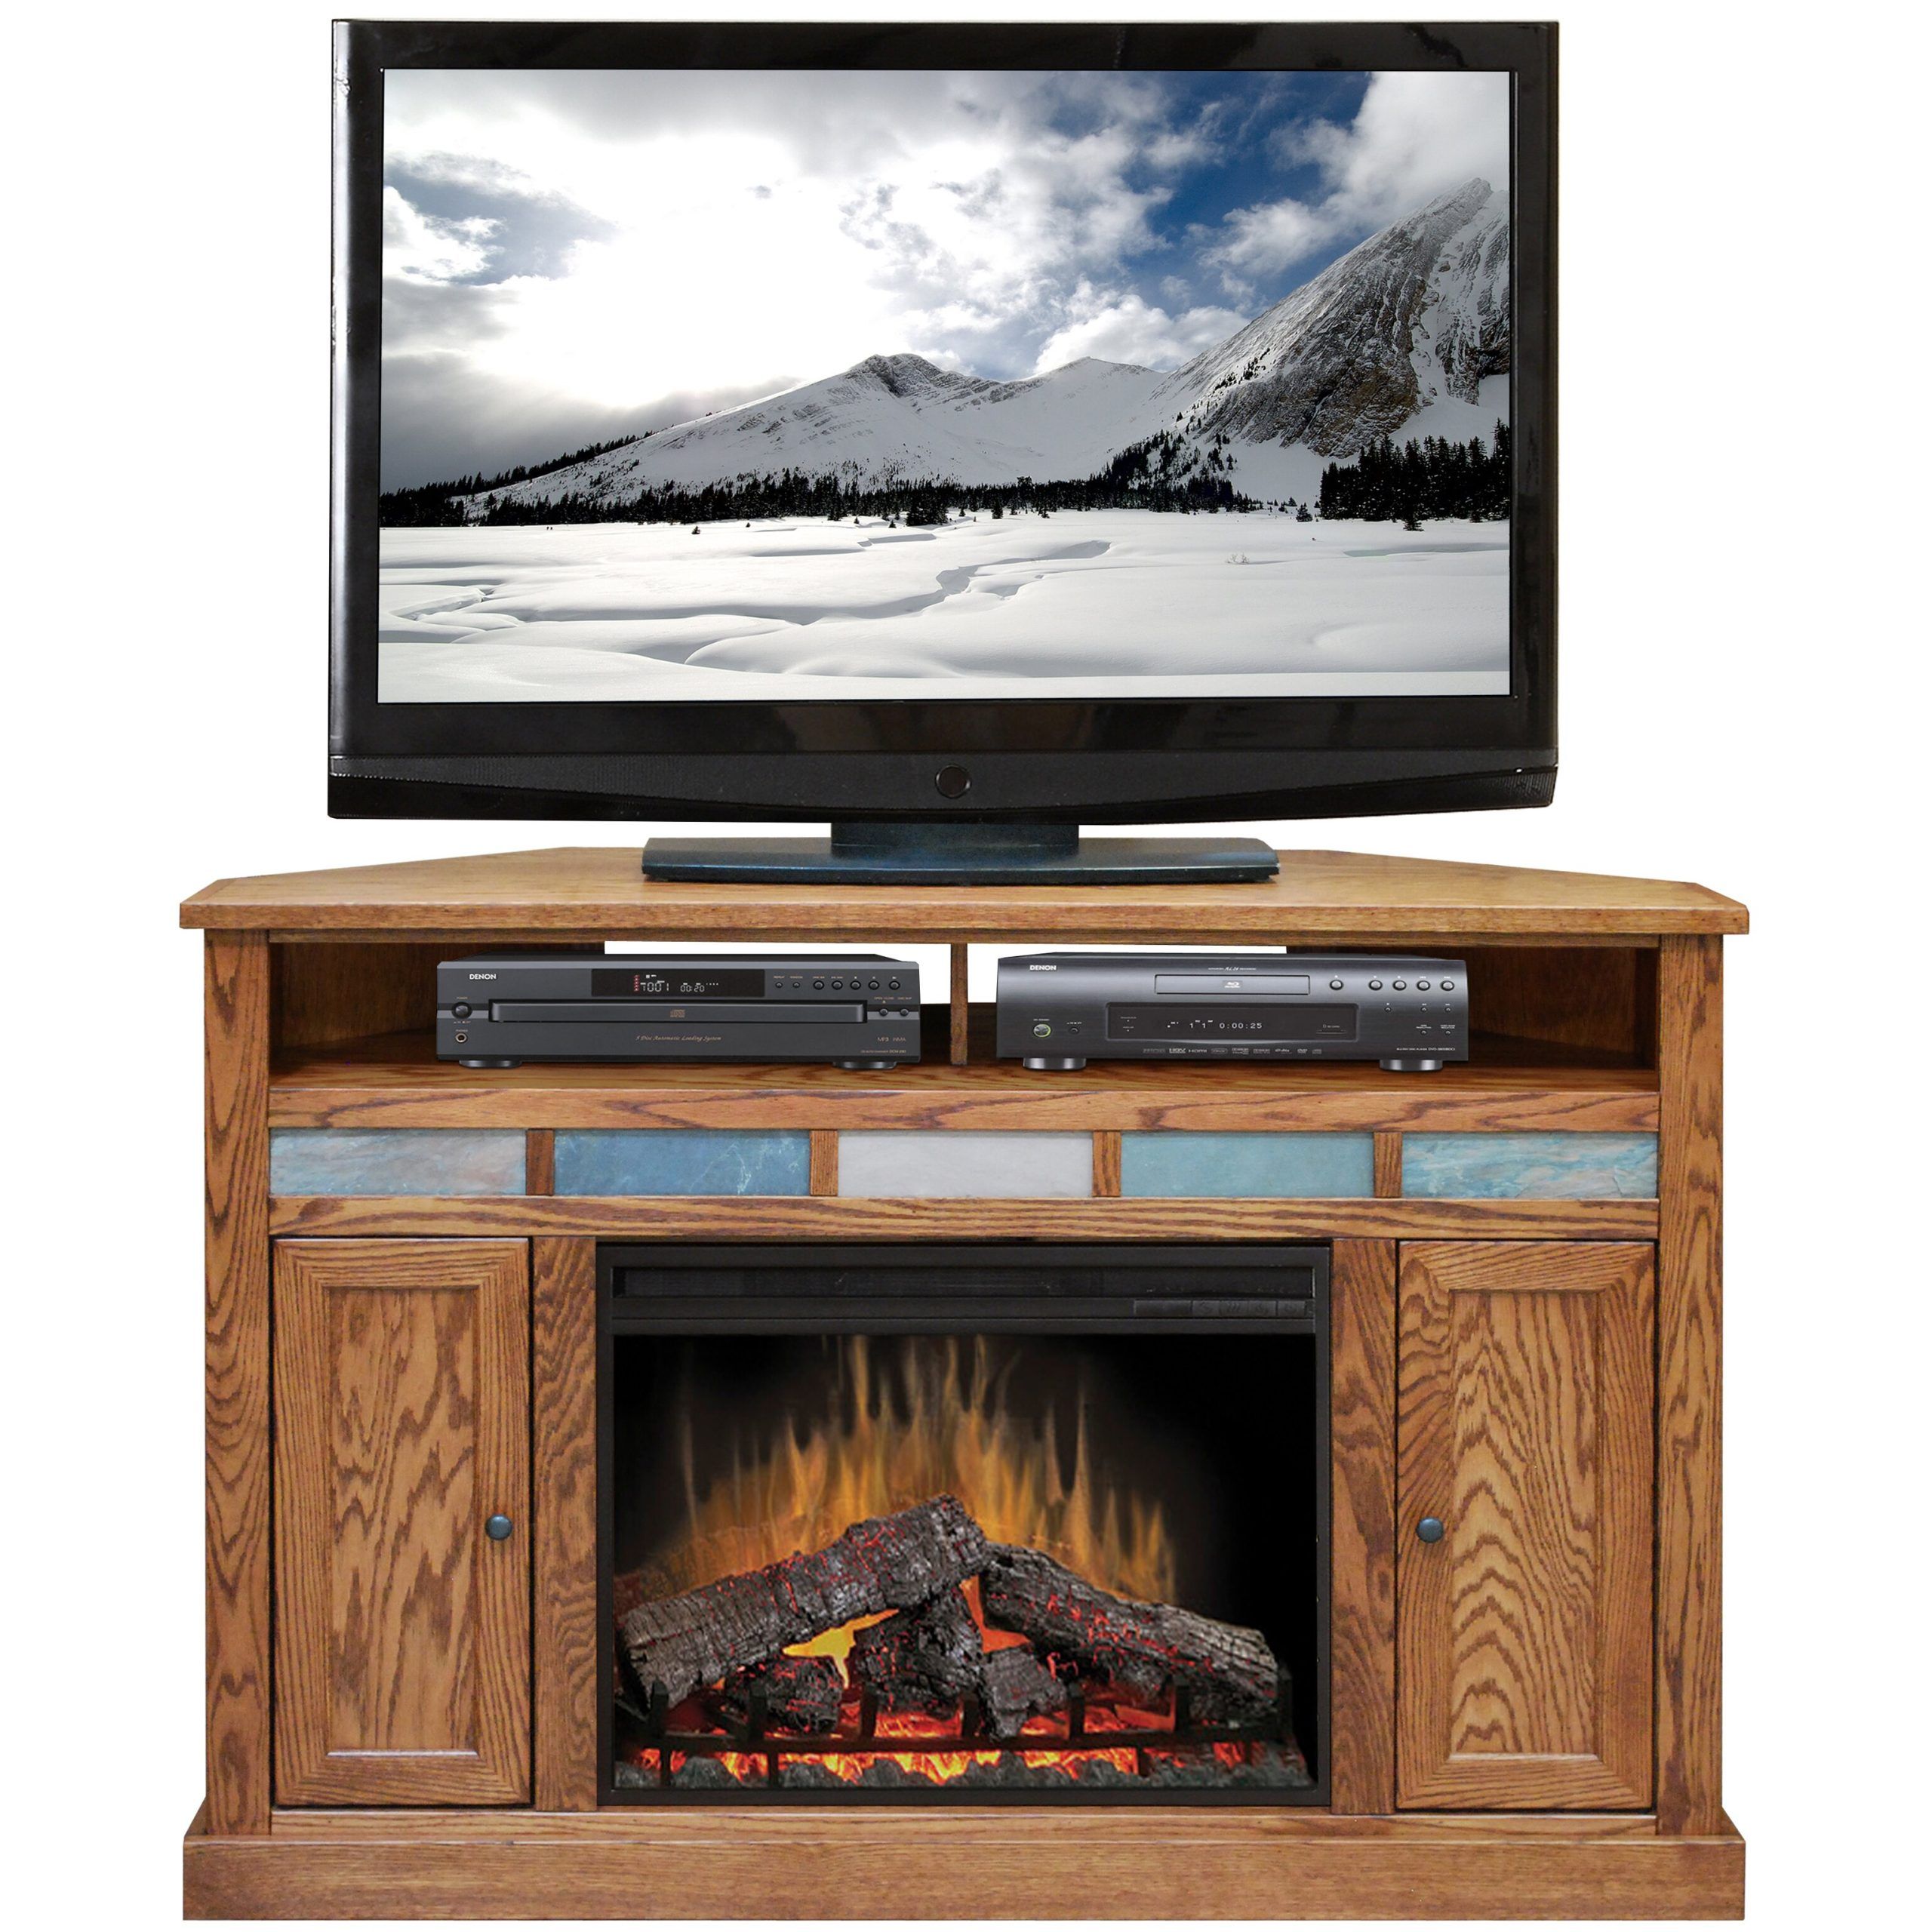 Legends Furniture Oak Creek Tv Stand With Electric Fireplace & Reviews Throughout Electric Fireplace Tv Stands (Gallery 20 of 20)